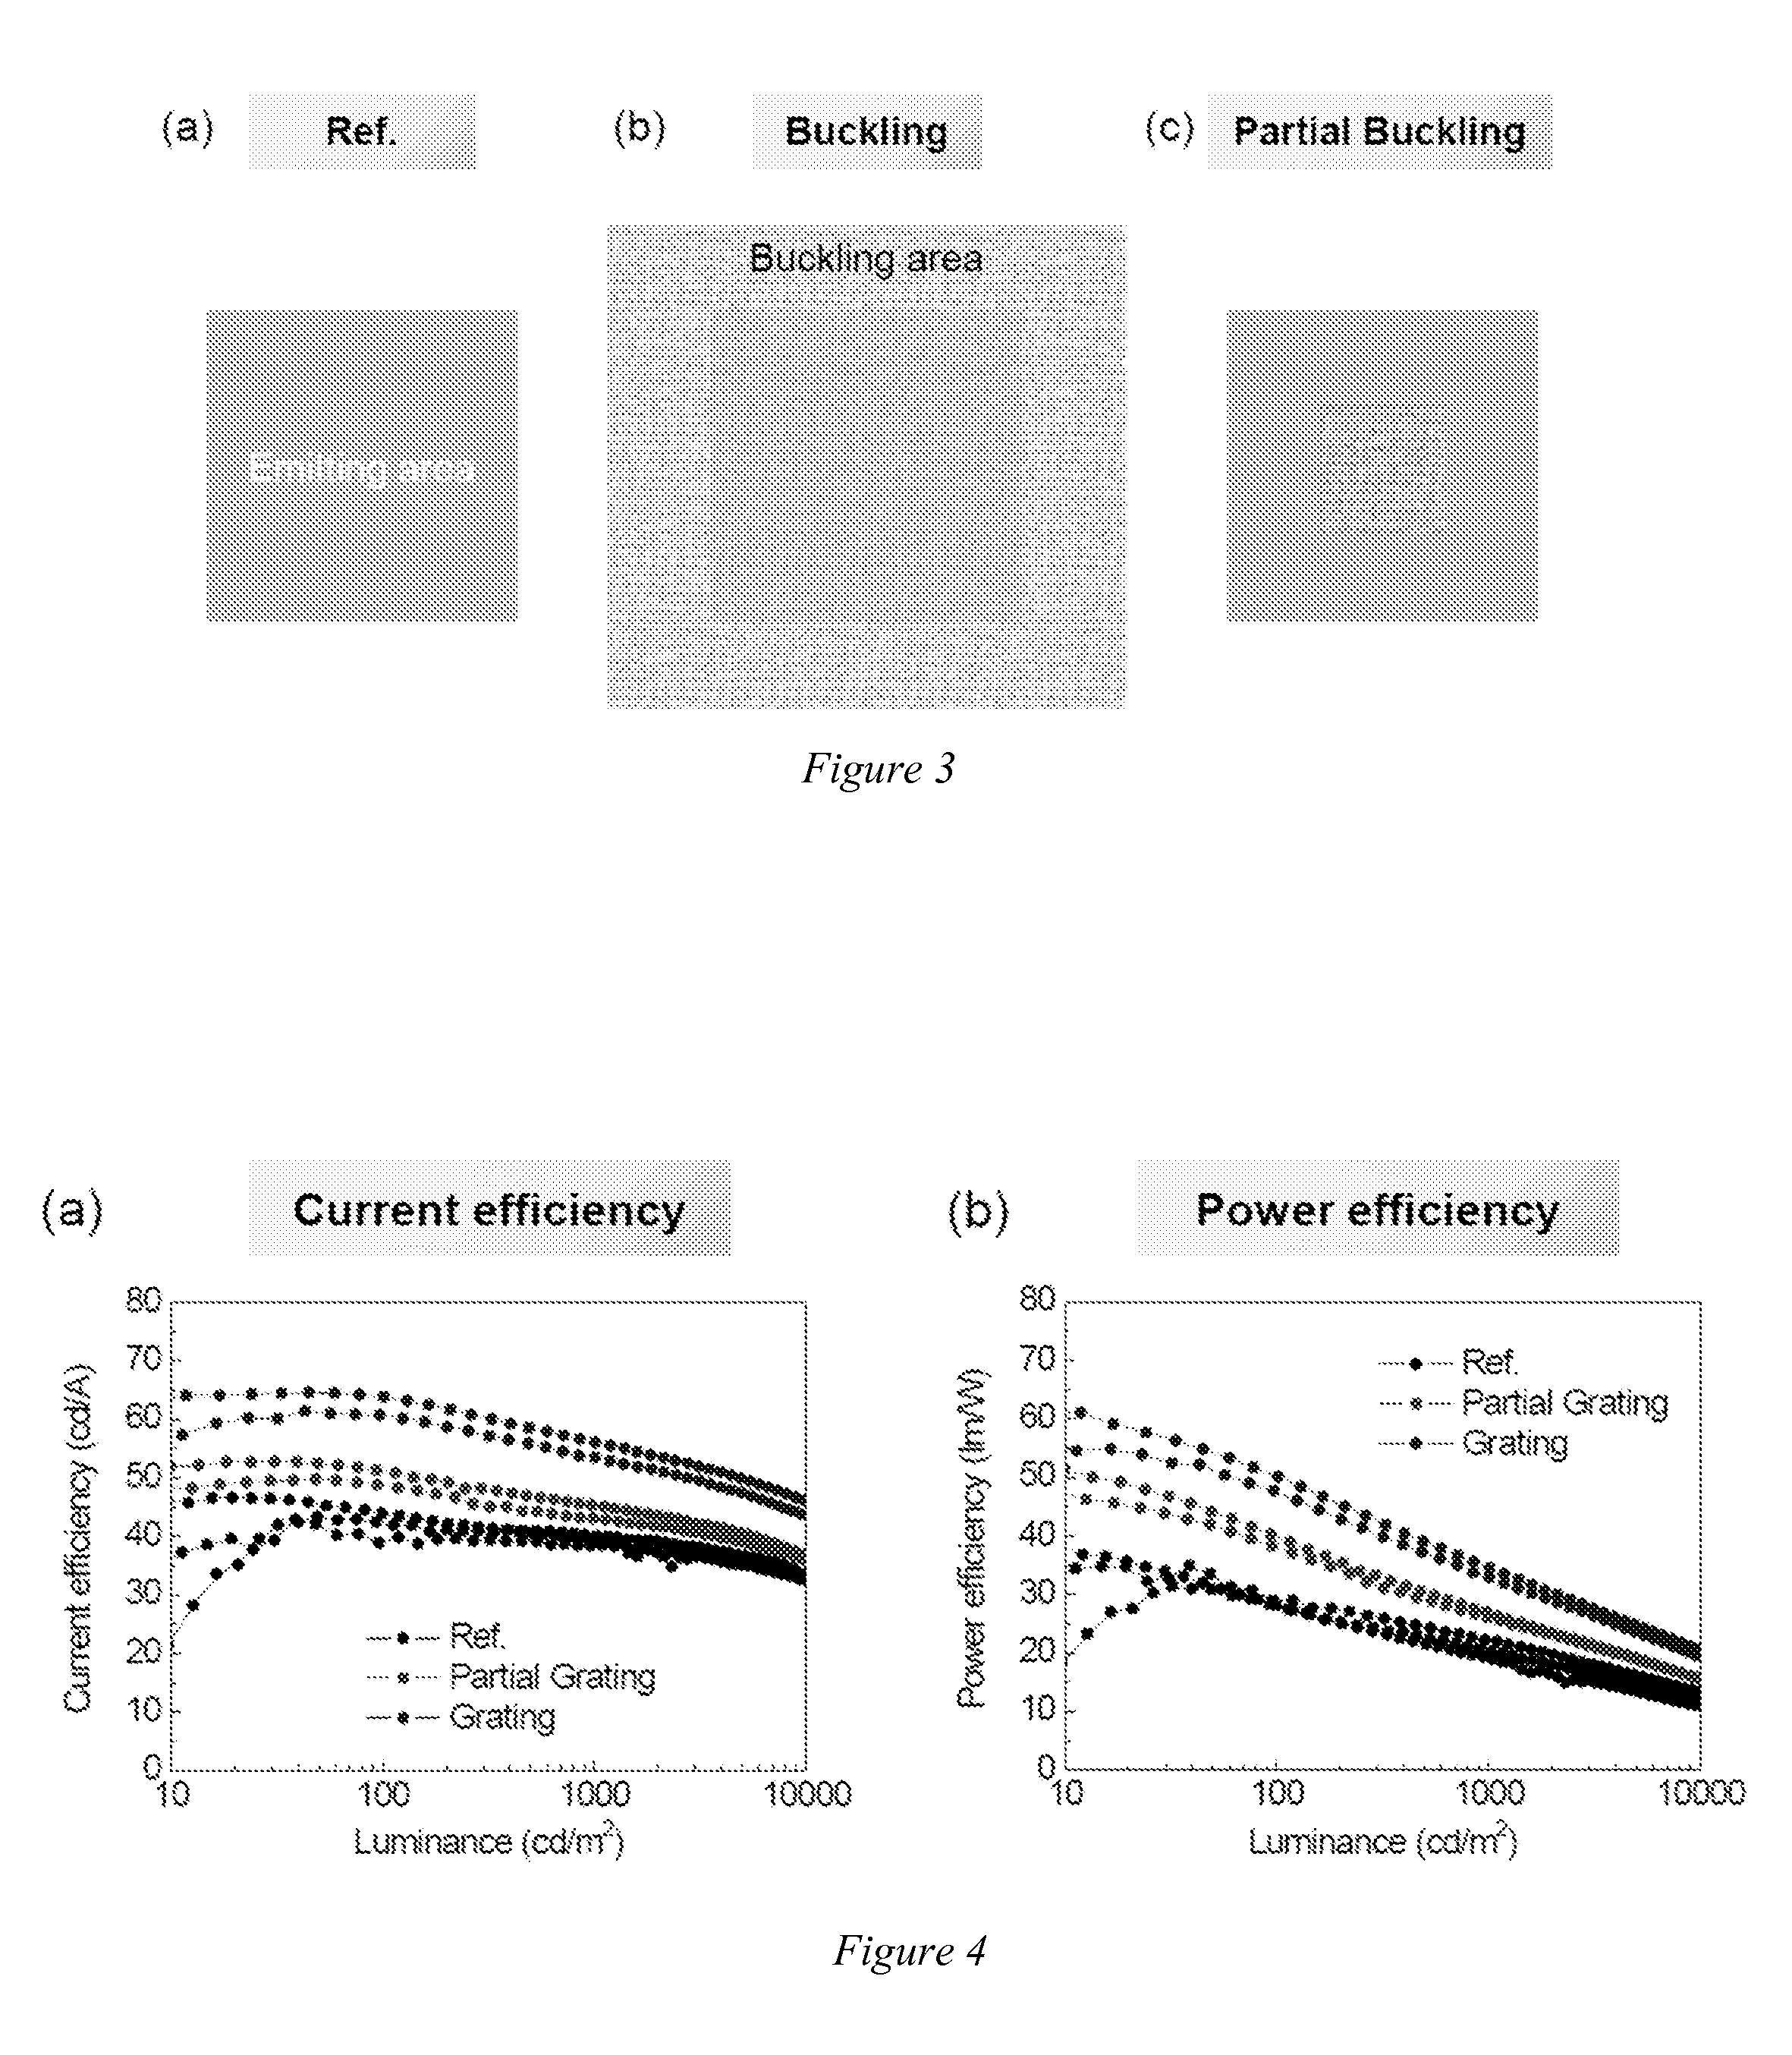 Buckled organic light emitting diode for light extraction without blurring